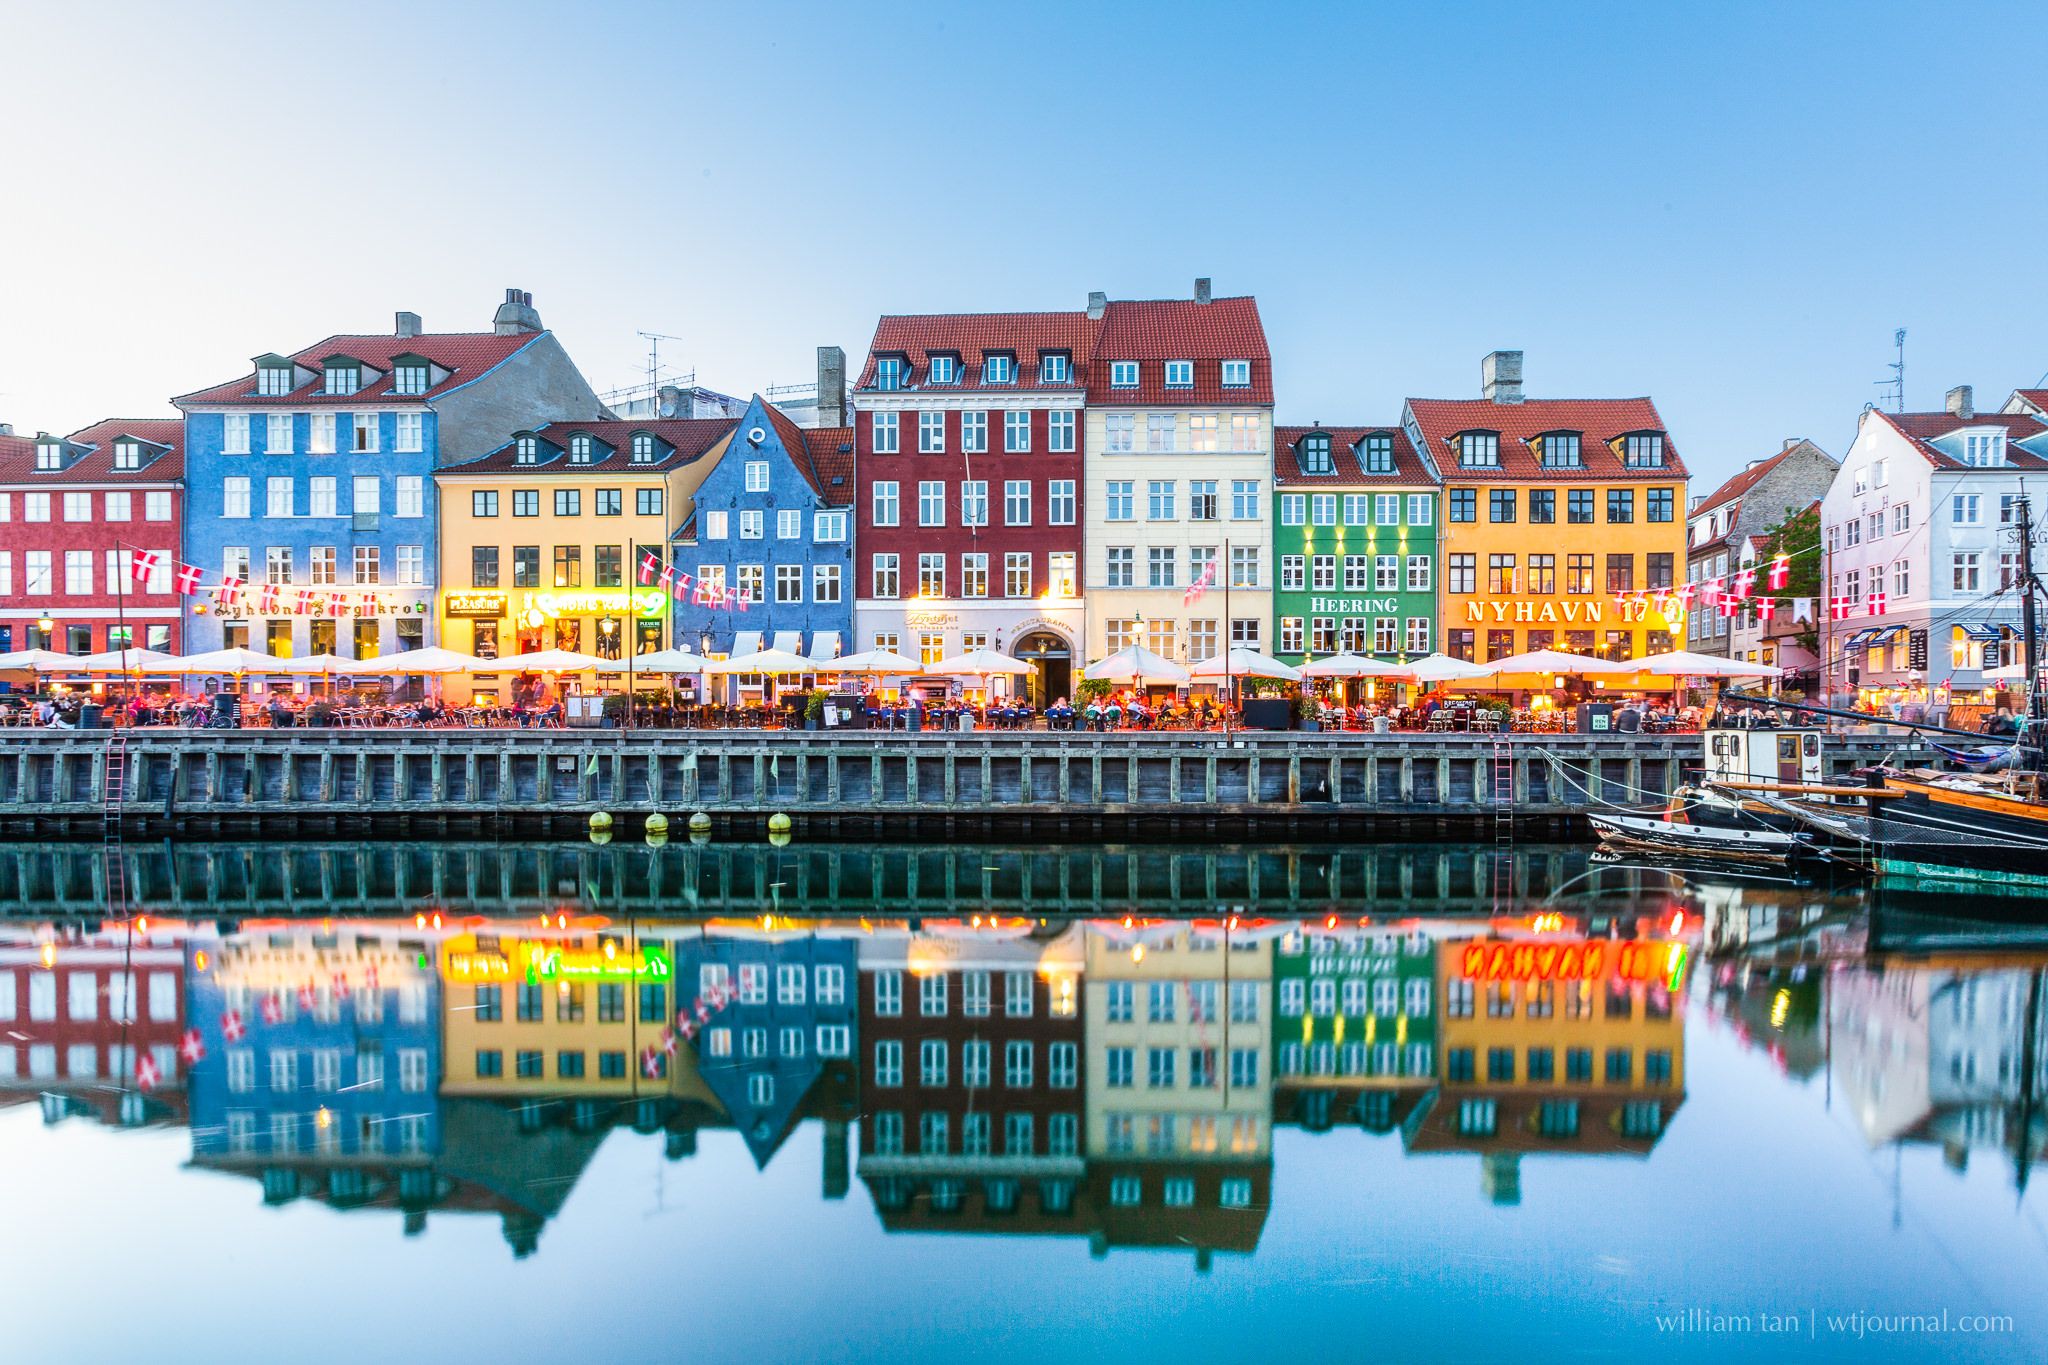 Nyhavn, making a reflection on the water, all lighting opened and loads of people sitting to have their meal